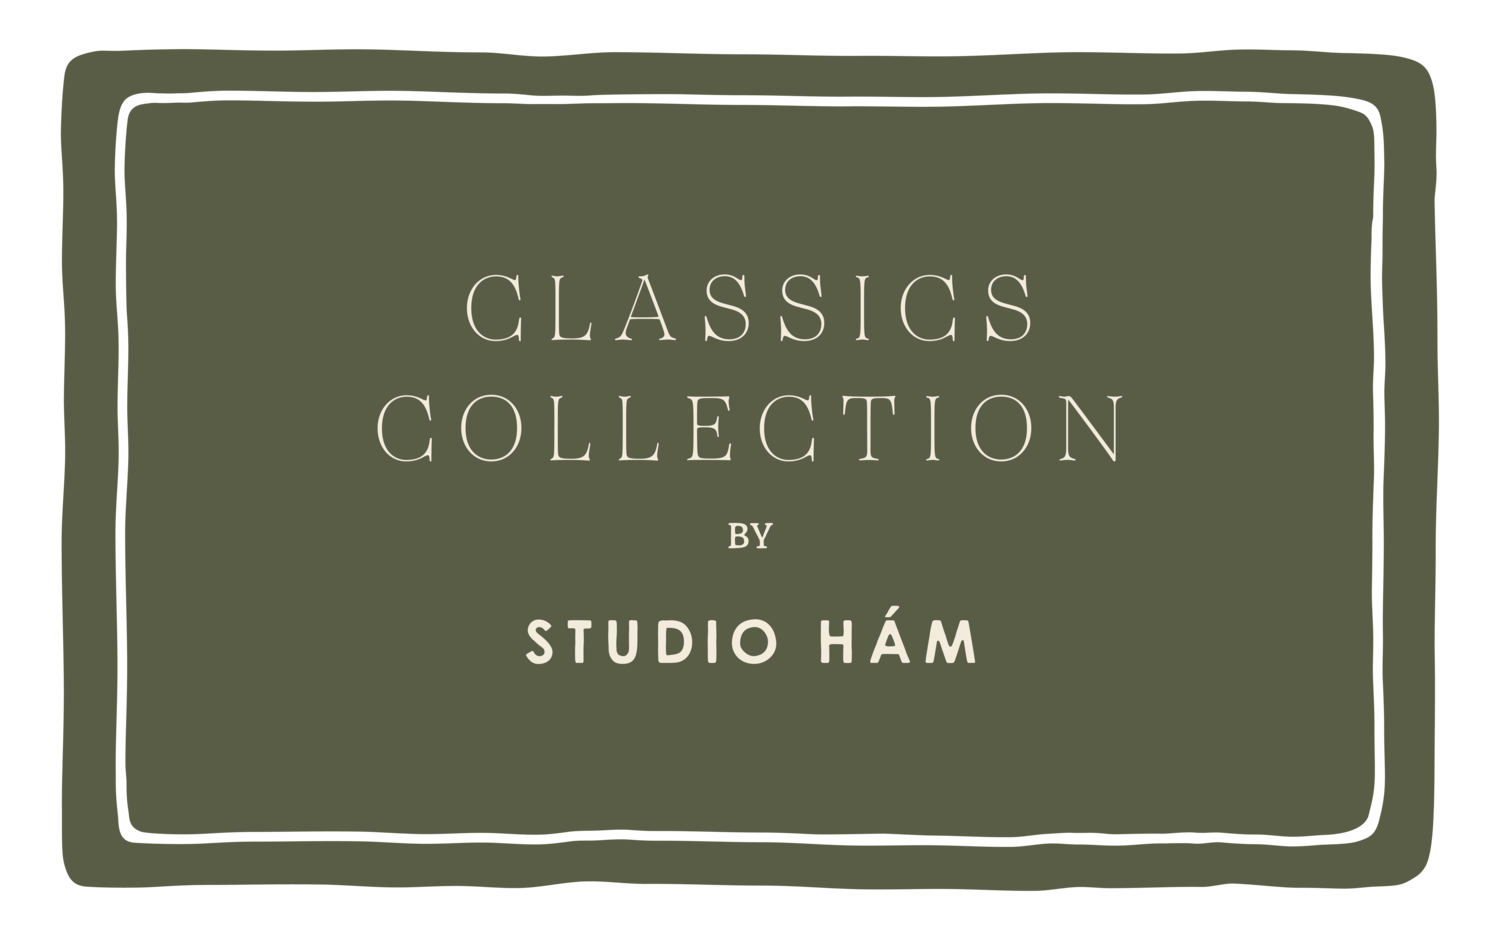 Classics Collection by Studio Hám illustrated title